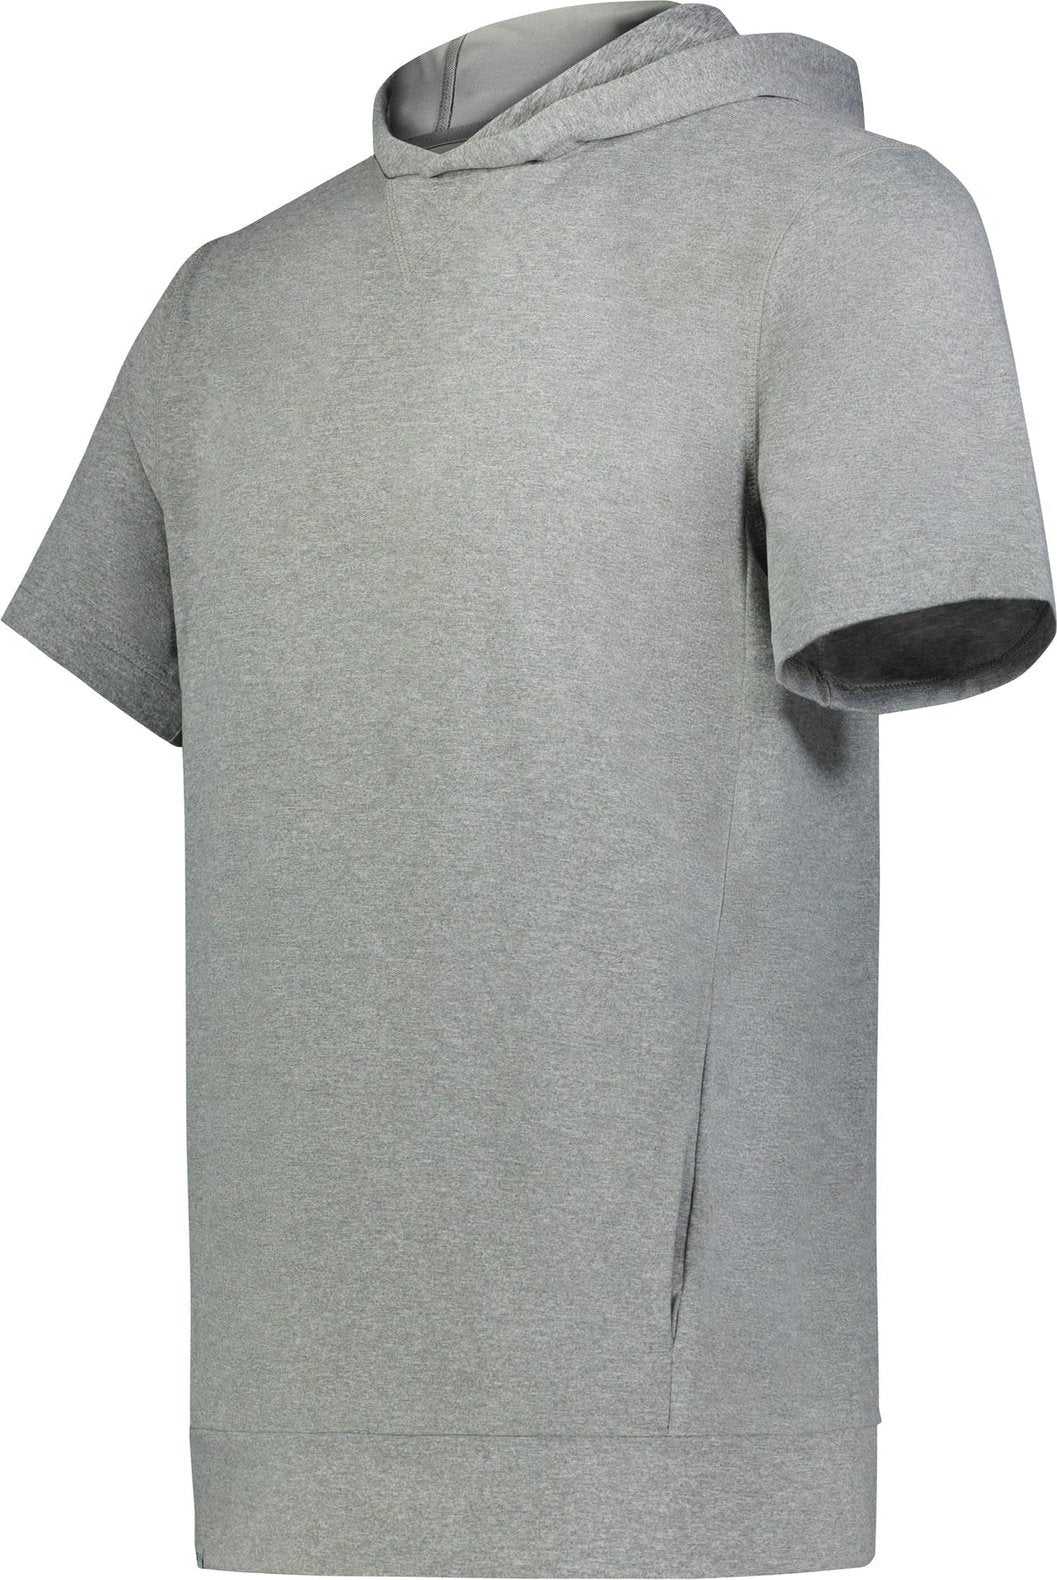 Holloway 222605 Youth Ventura Soft Knit Short Sleeve Hoodie - Grey Heather - HIT a Double